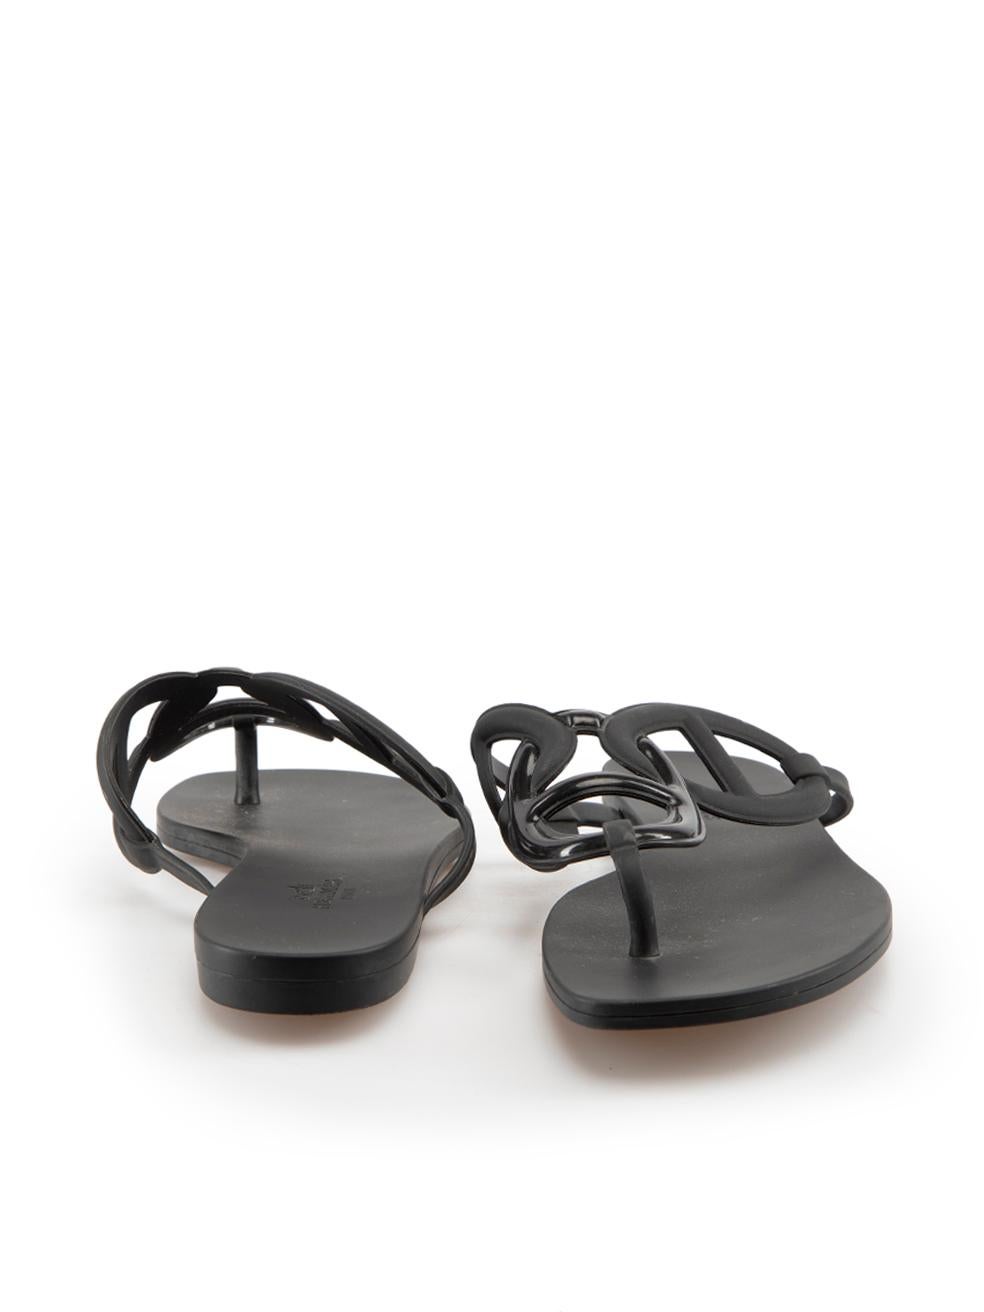 Hermès Black Egerie Jelly Sandals Size EU 37 In Excellent Condition For Sale In London, GB